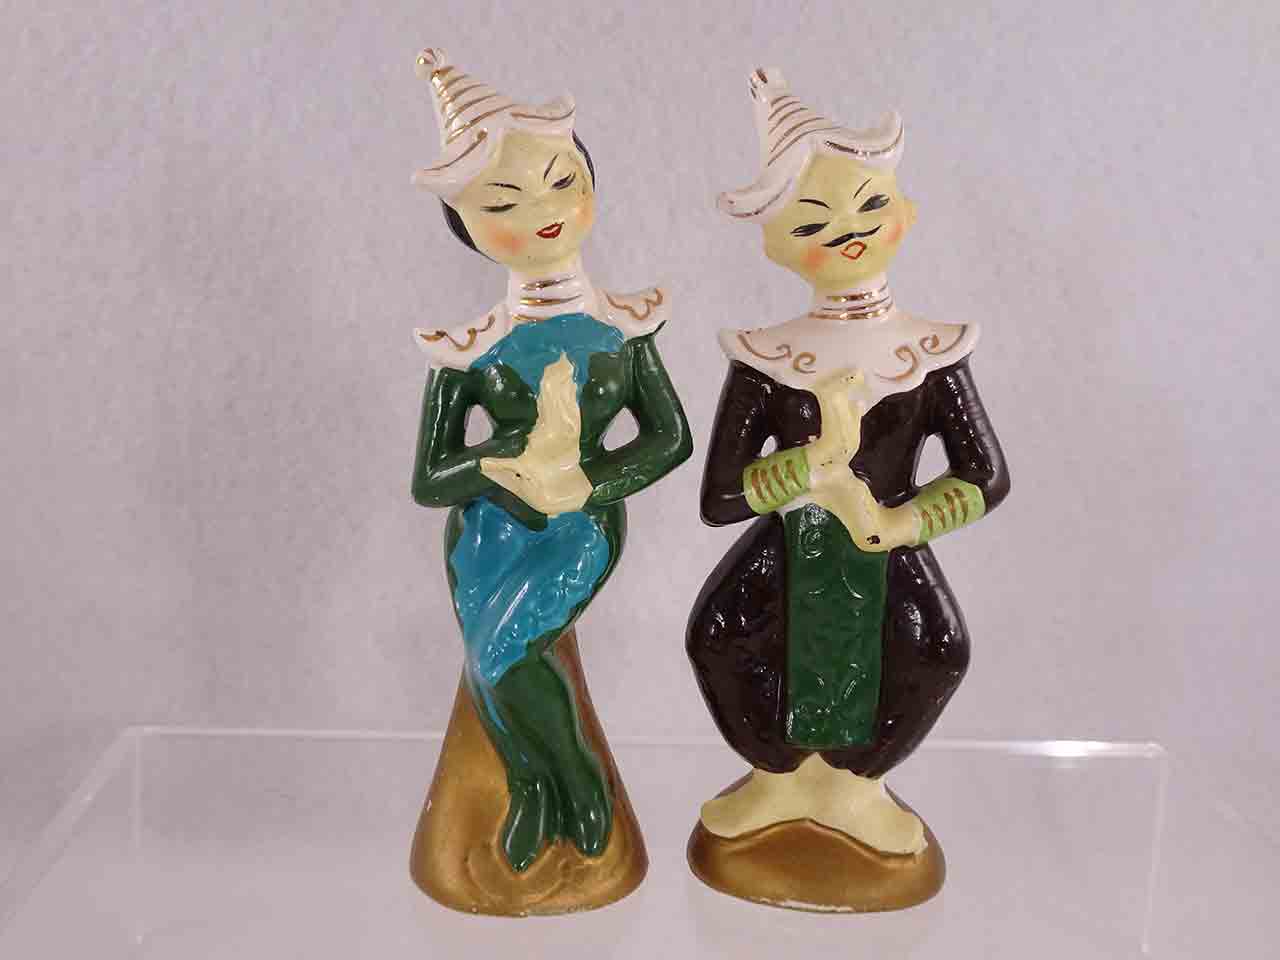 Southeast Asian dancers / royalty salt and pepper shakers